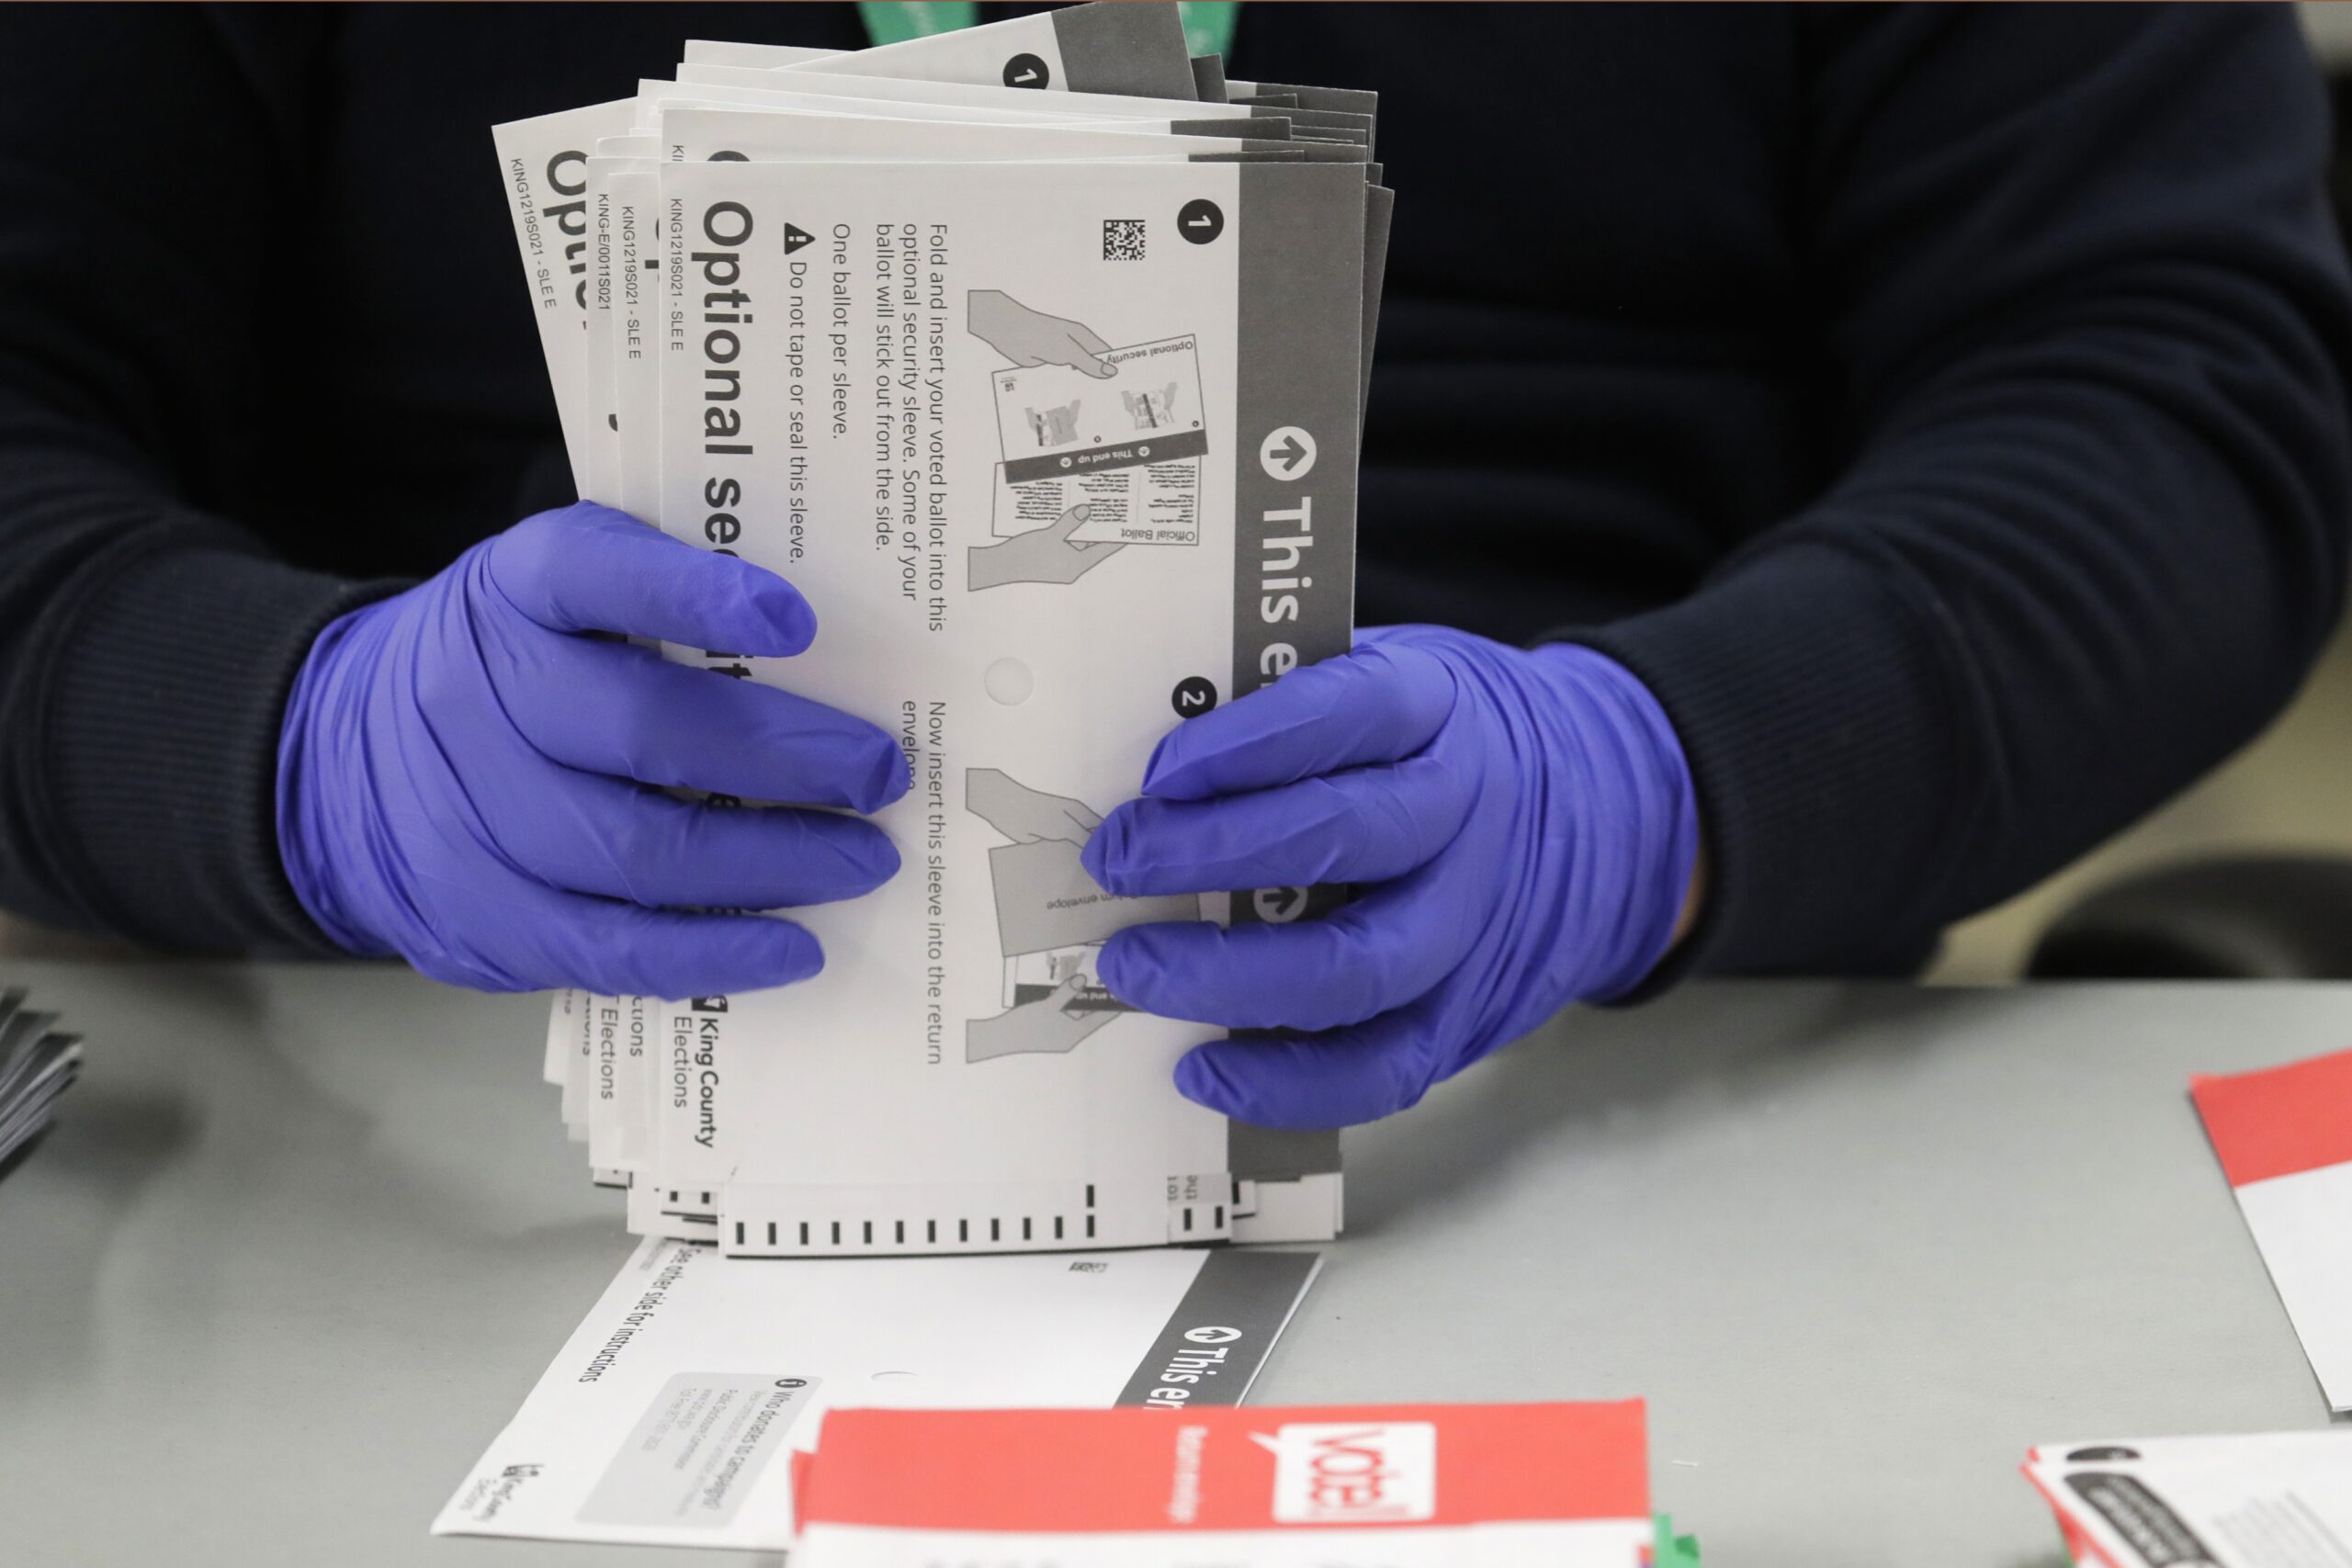 A worker wears gloves while handling ballots